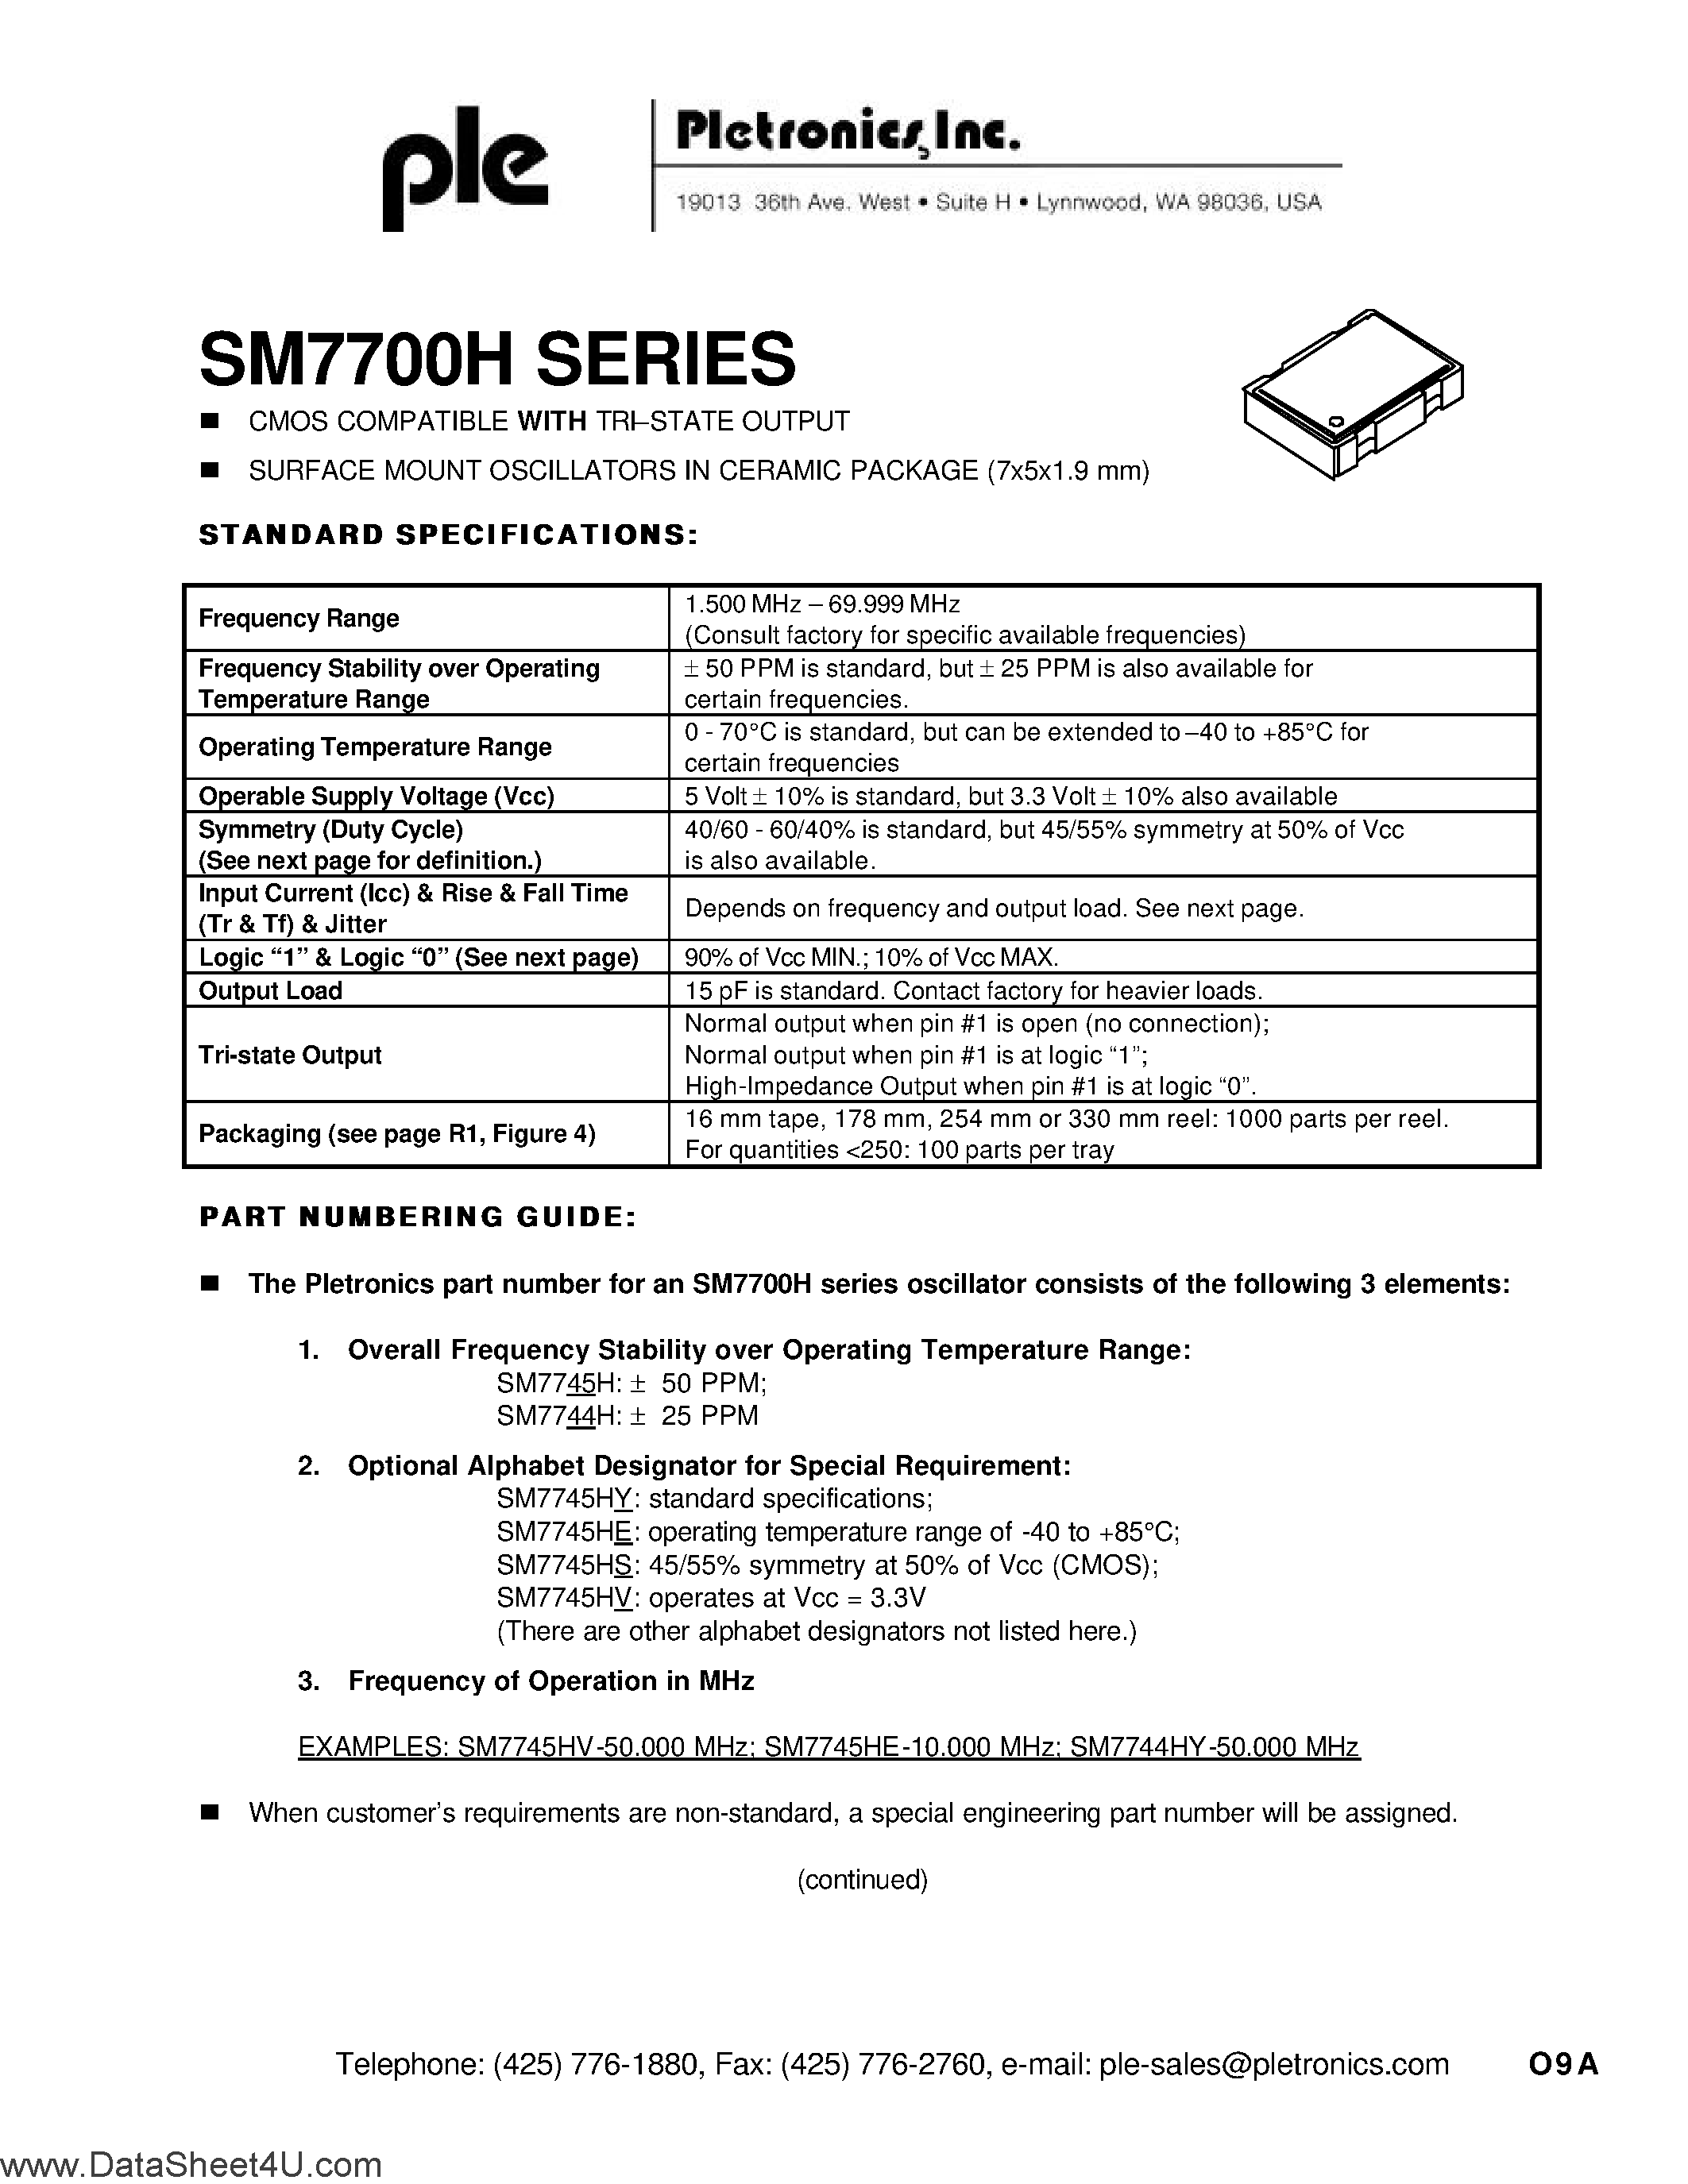 Даташит SM7744H-(SM7700H Series) CMOS COMPATIBLE WITH TRI-STATE OUTPUT страница 1